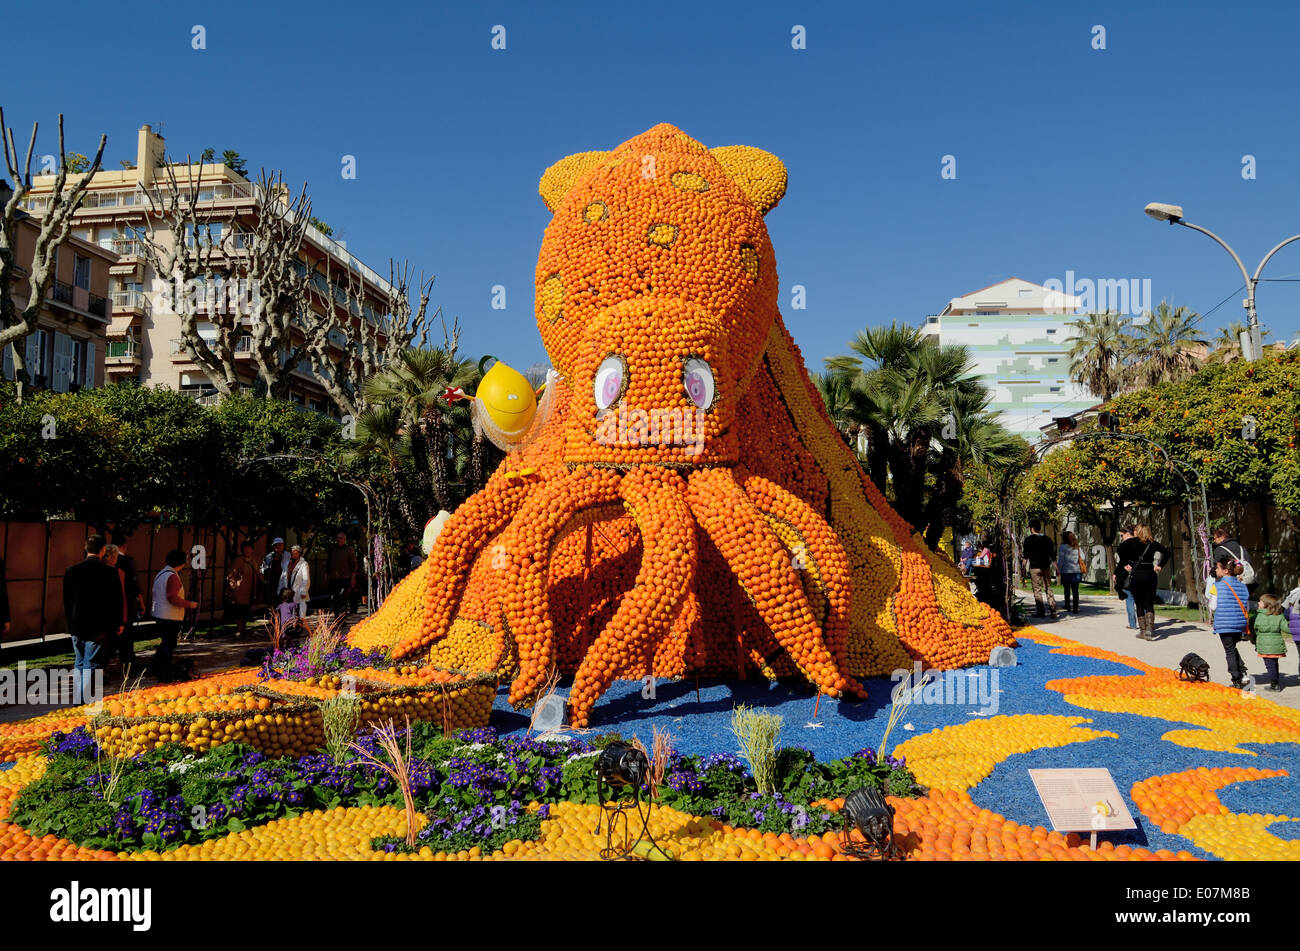 Giant Octopus or Giant Squid Sculpture Made of Oranges at the Annual Lemon Festival Menton Alpes-Maritimes France Stock Photo